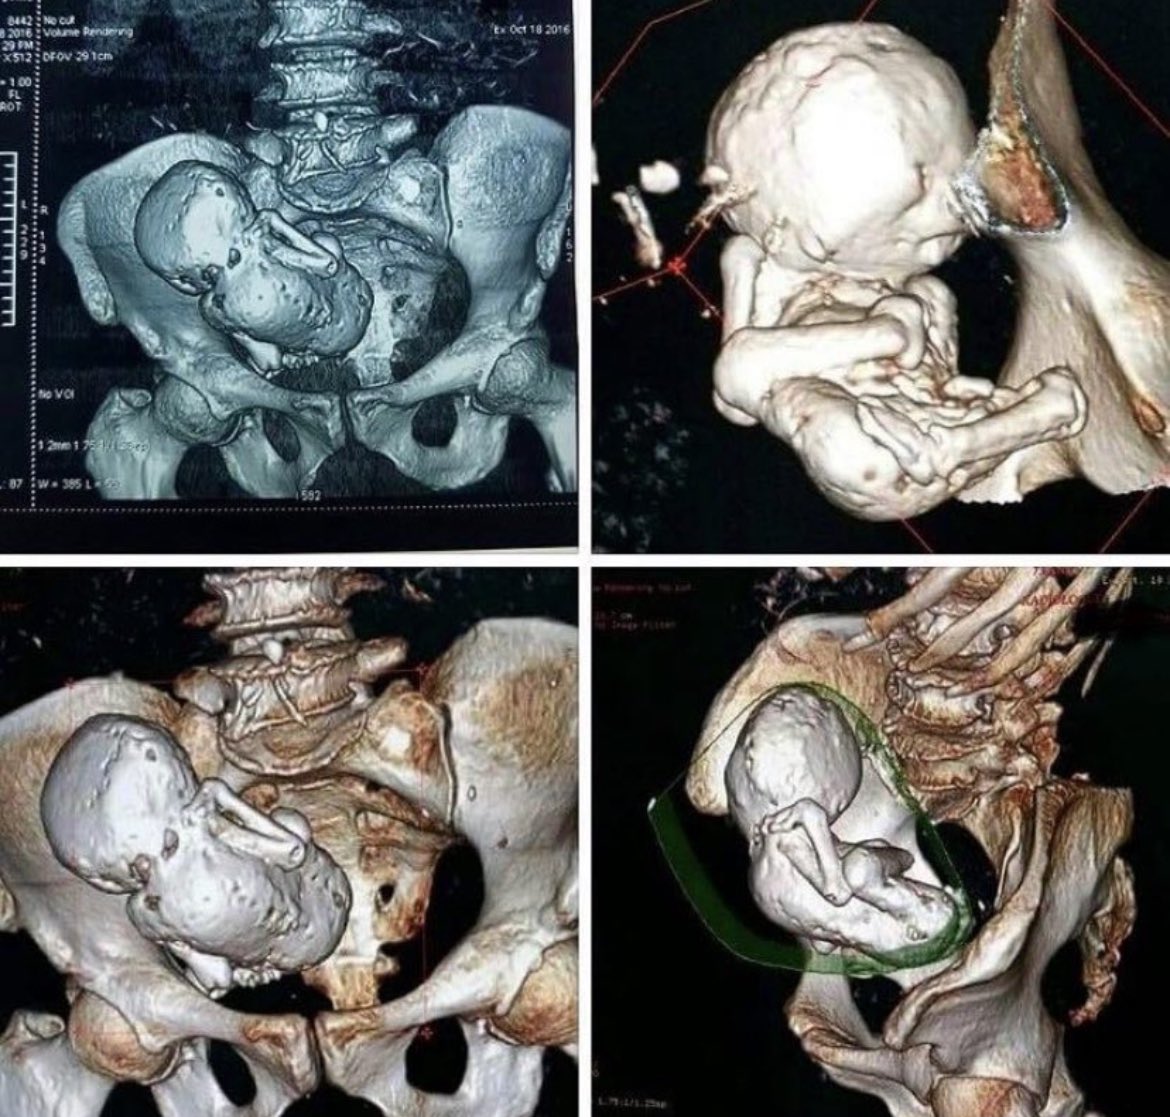 CT scan shows the moment doctors found a ‘stone baby’ inside the womb of a 73-year-old woman from Algeria. The stone baby, also known as a lithopedion is created when a pregnancy forms in the abdomen rather than in the uterus. 

When the pregnancy fails, the body lacks a…